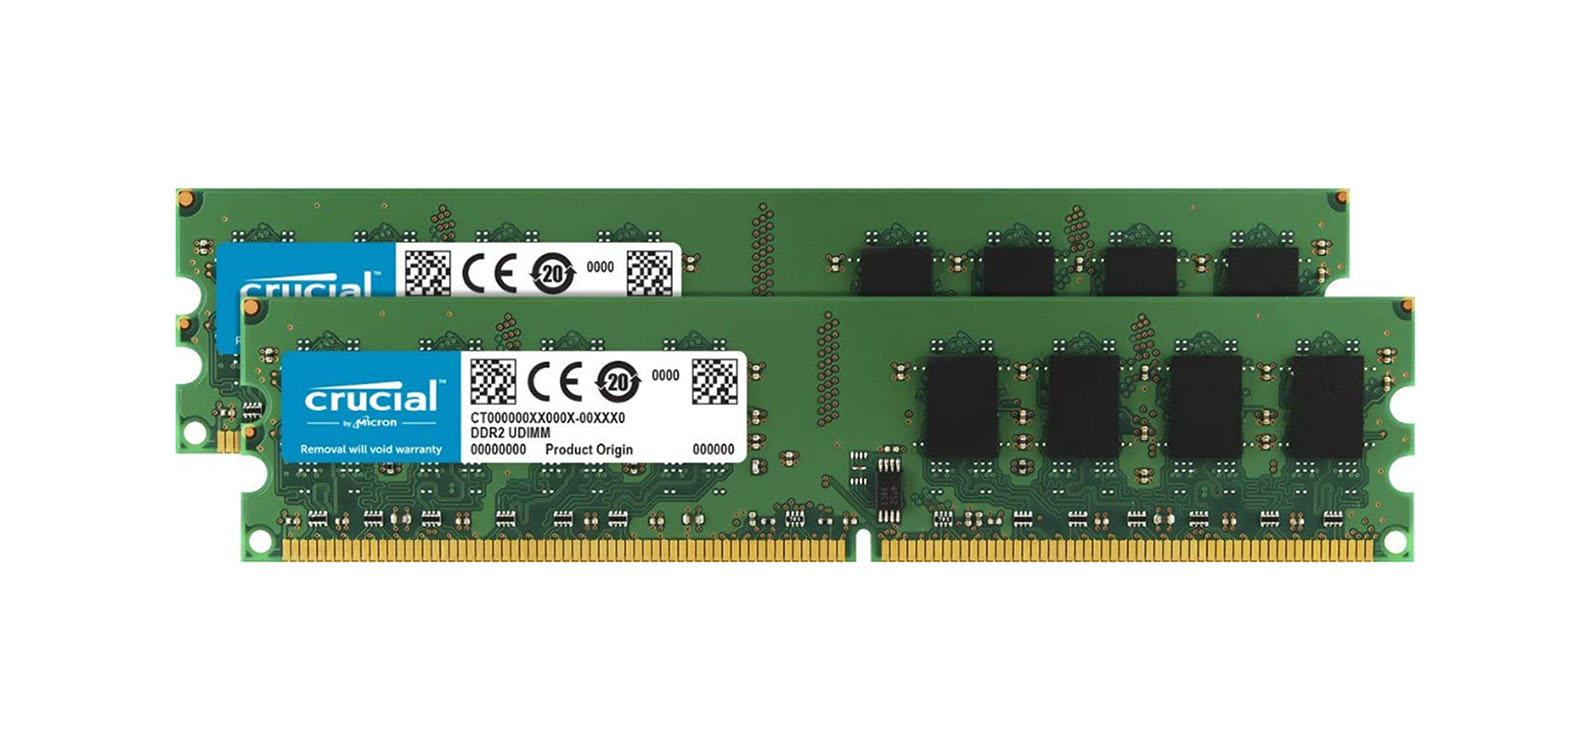 Crucial CT553034 8GB Kit (2 x 4GB) DDR2-667MHz PC2-5300 ECC Fully Buffered CL5 240-Pin DIMM Memory upgrade for Supermicro SUPER X7DBR-3